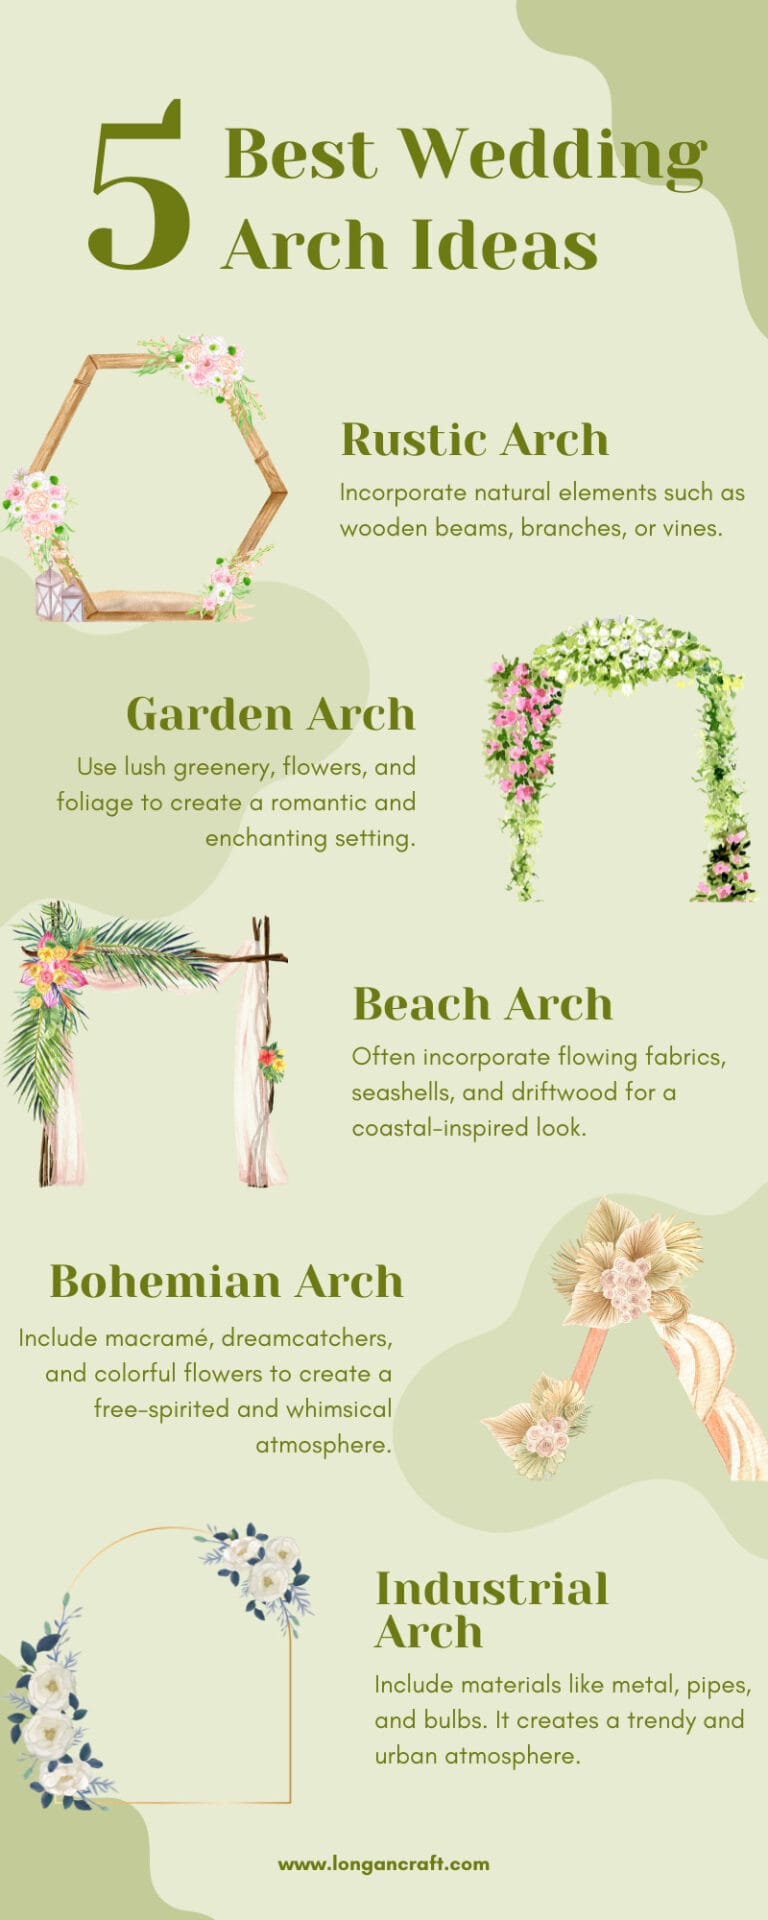 An infographic of 5 best wedding arch ideas